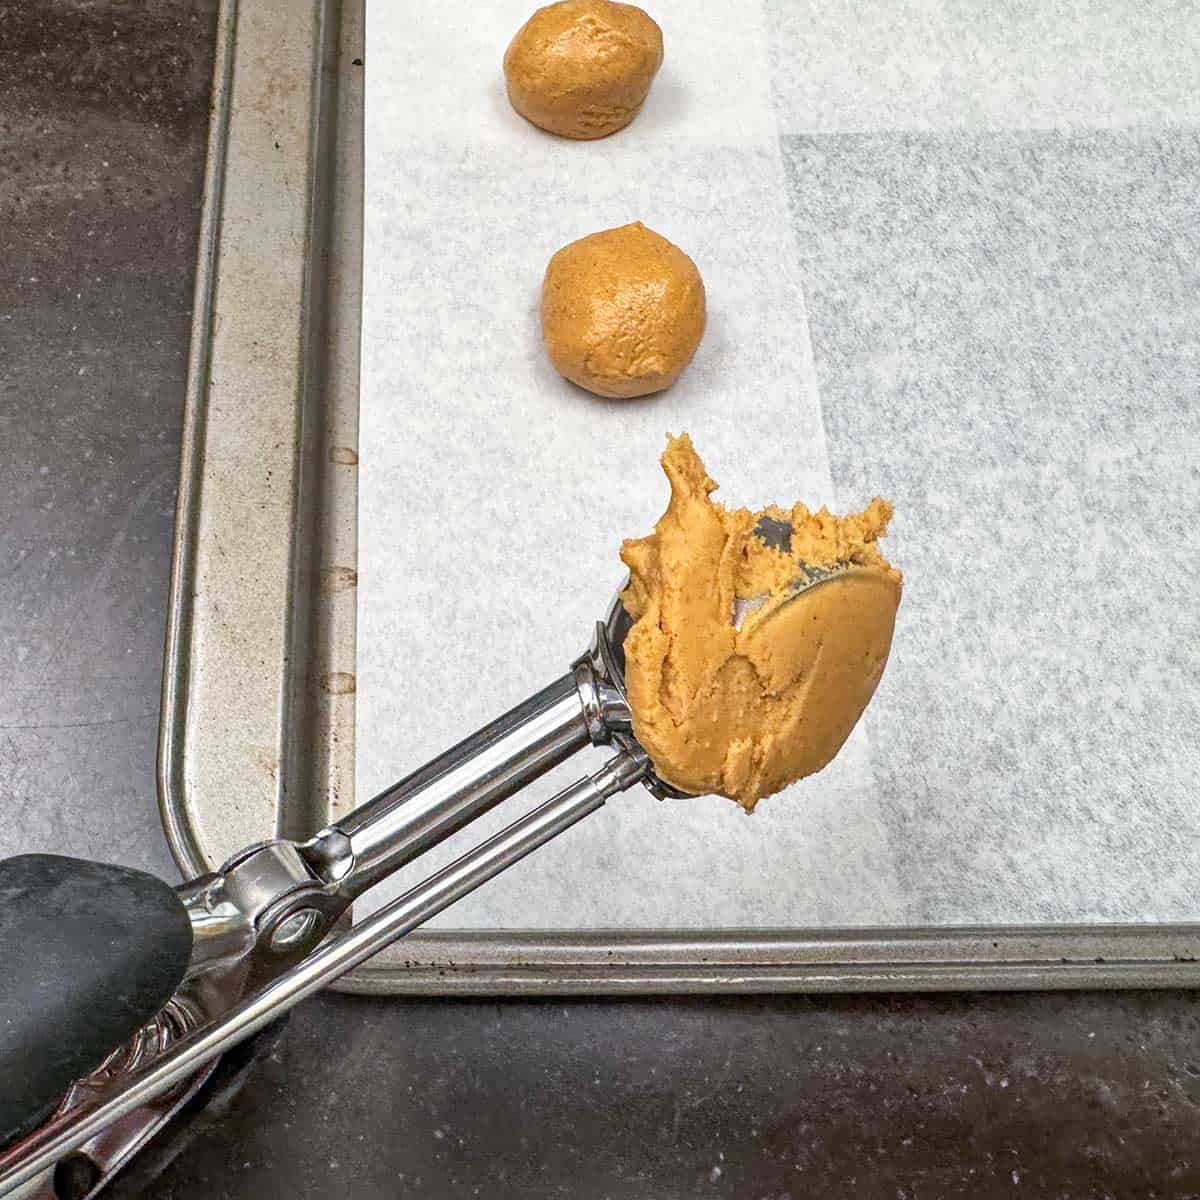 I use a small scooper for the round peanut butter to be stuffed into the chocolate cookie.